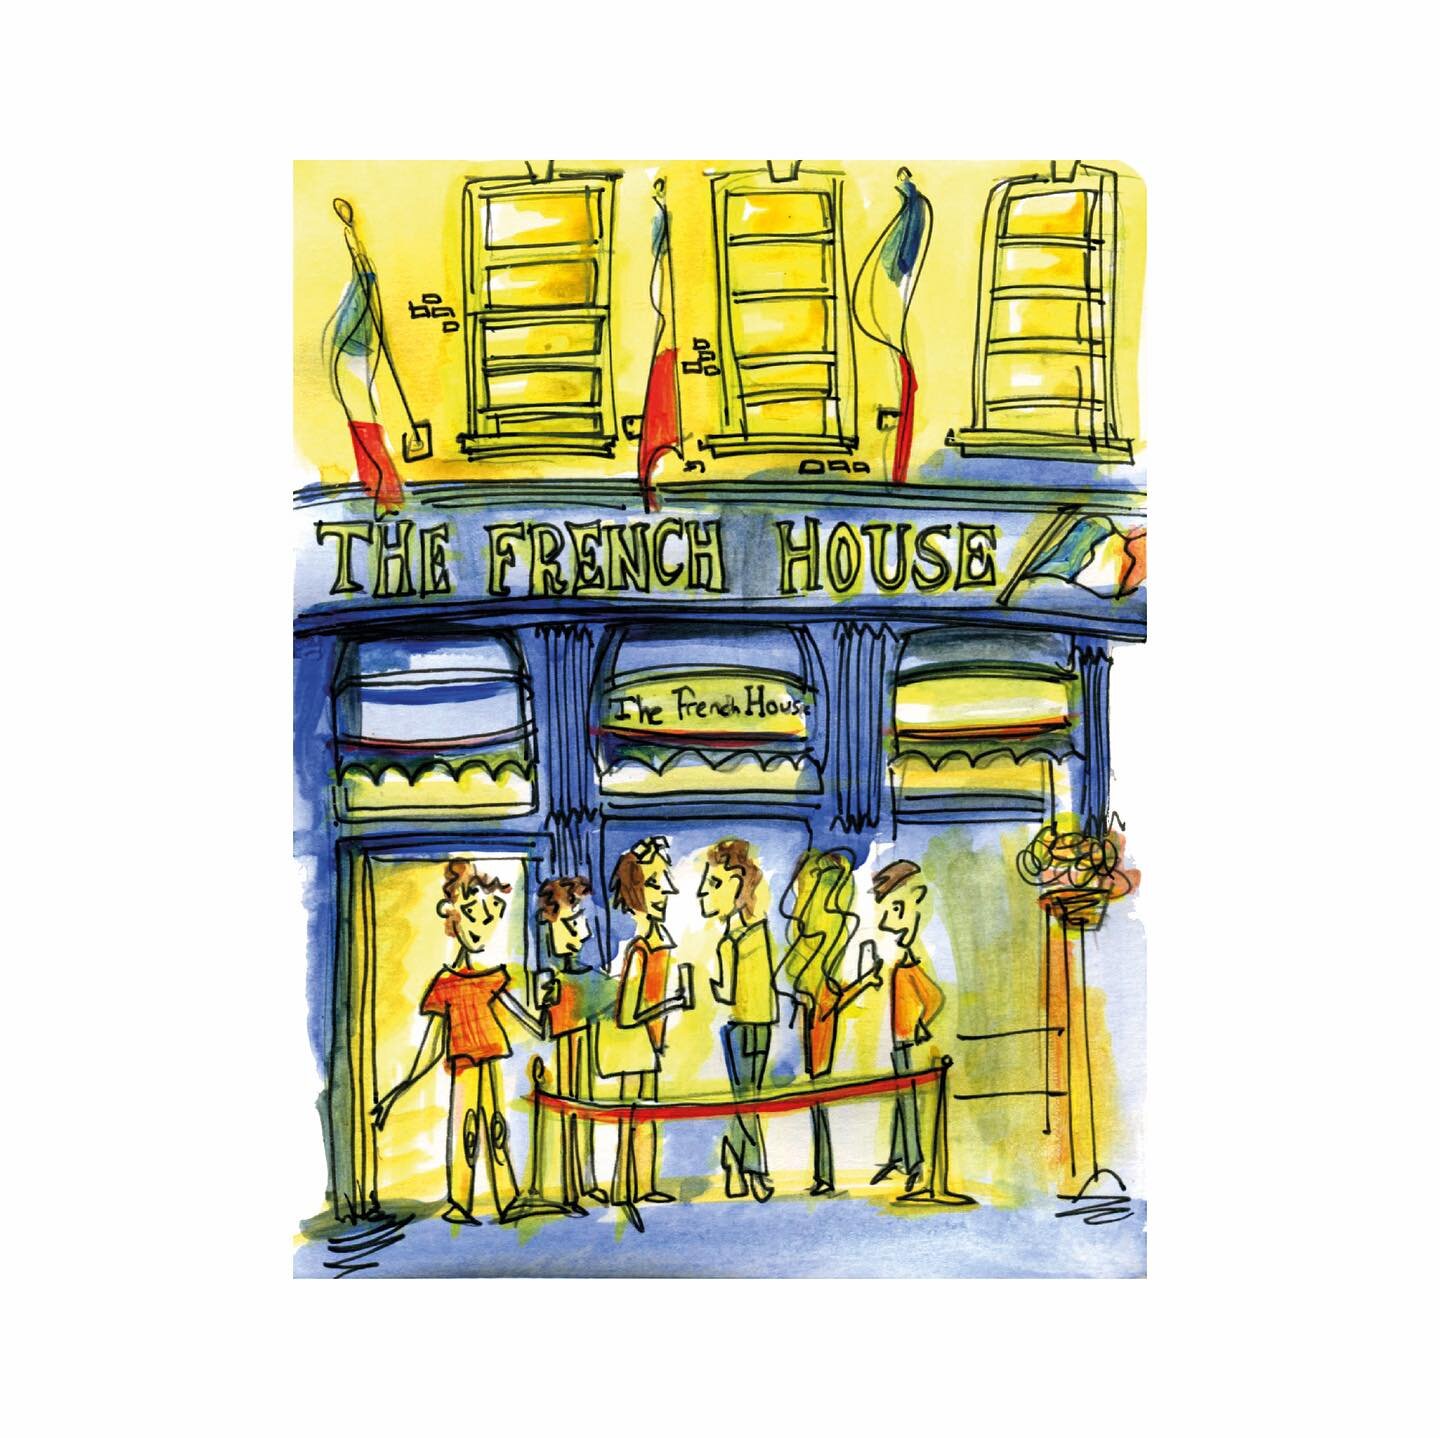 The French House ⟡ The Hawley Arms ⟡ The Eagle 

Some Central, Northern London staples 🤝🏼

@frenchhousesoho 
@thehawleyarms 
@eaglefarringdon 

🍻